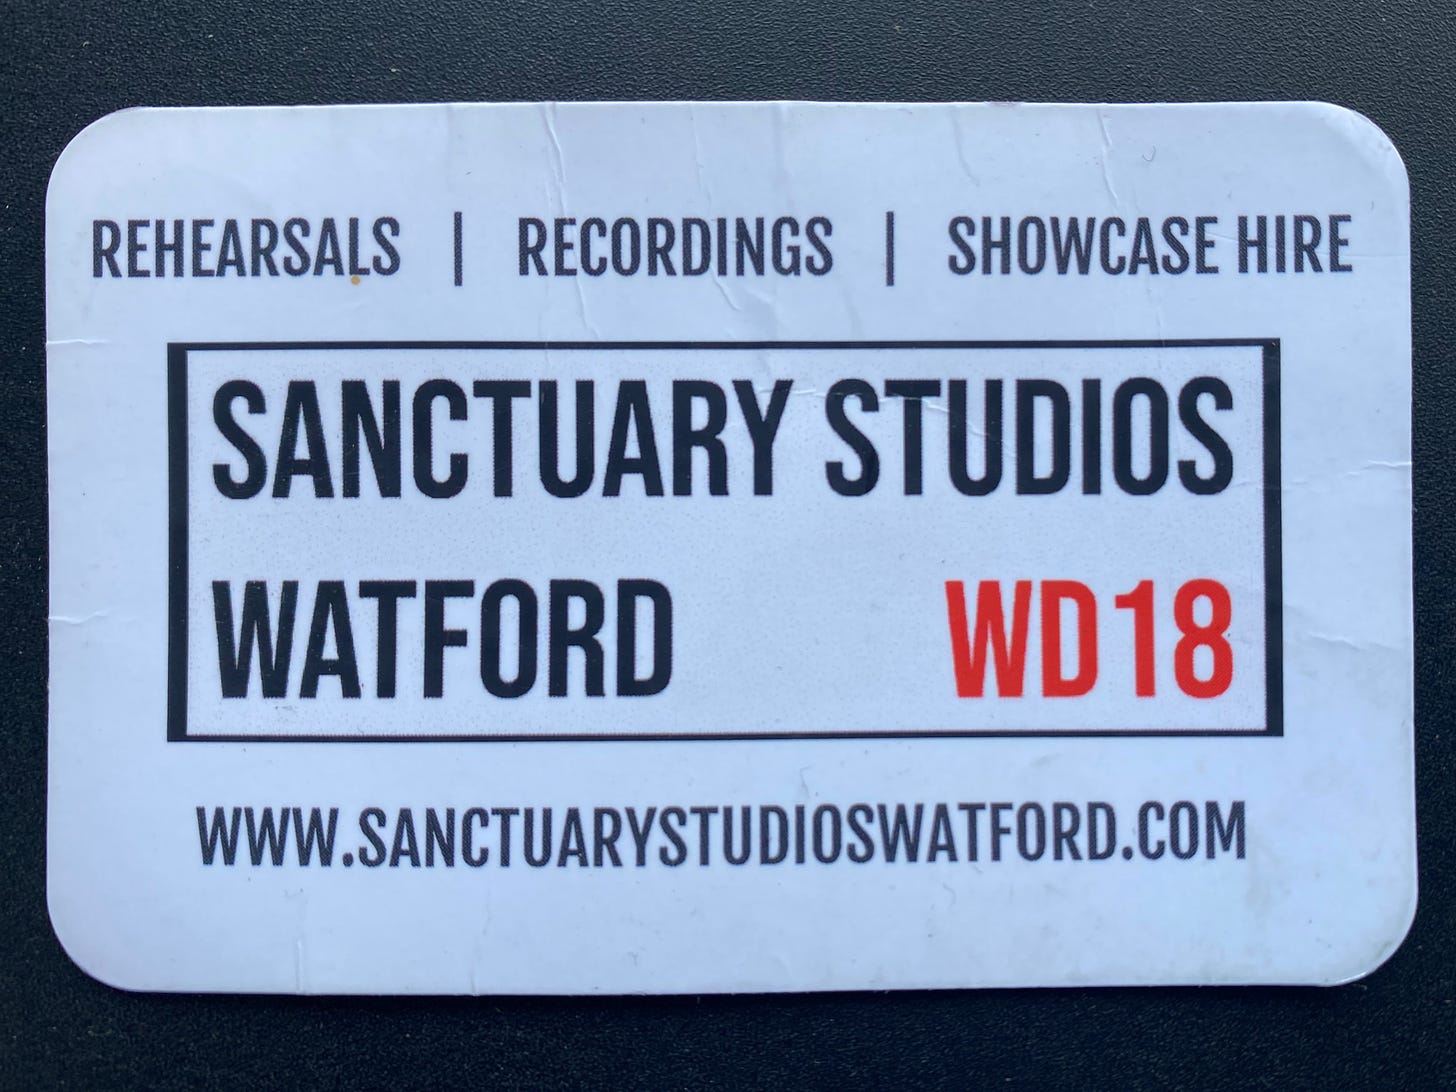 Promotional card for Sanctuary Studios in Watford